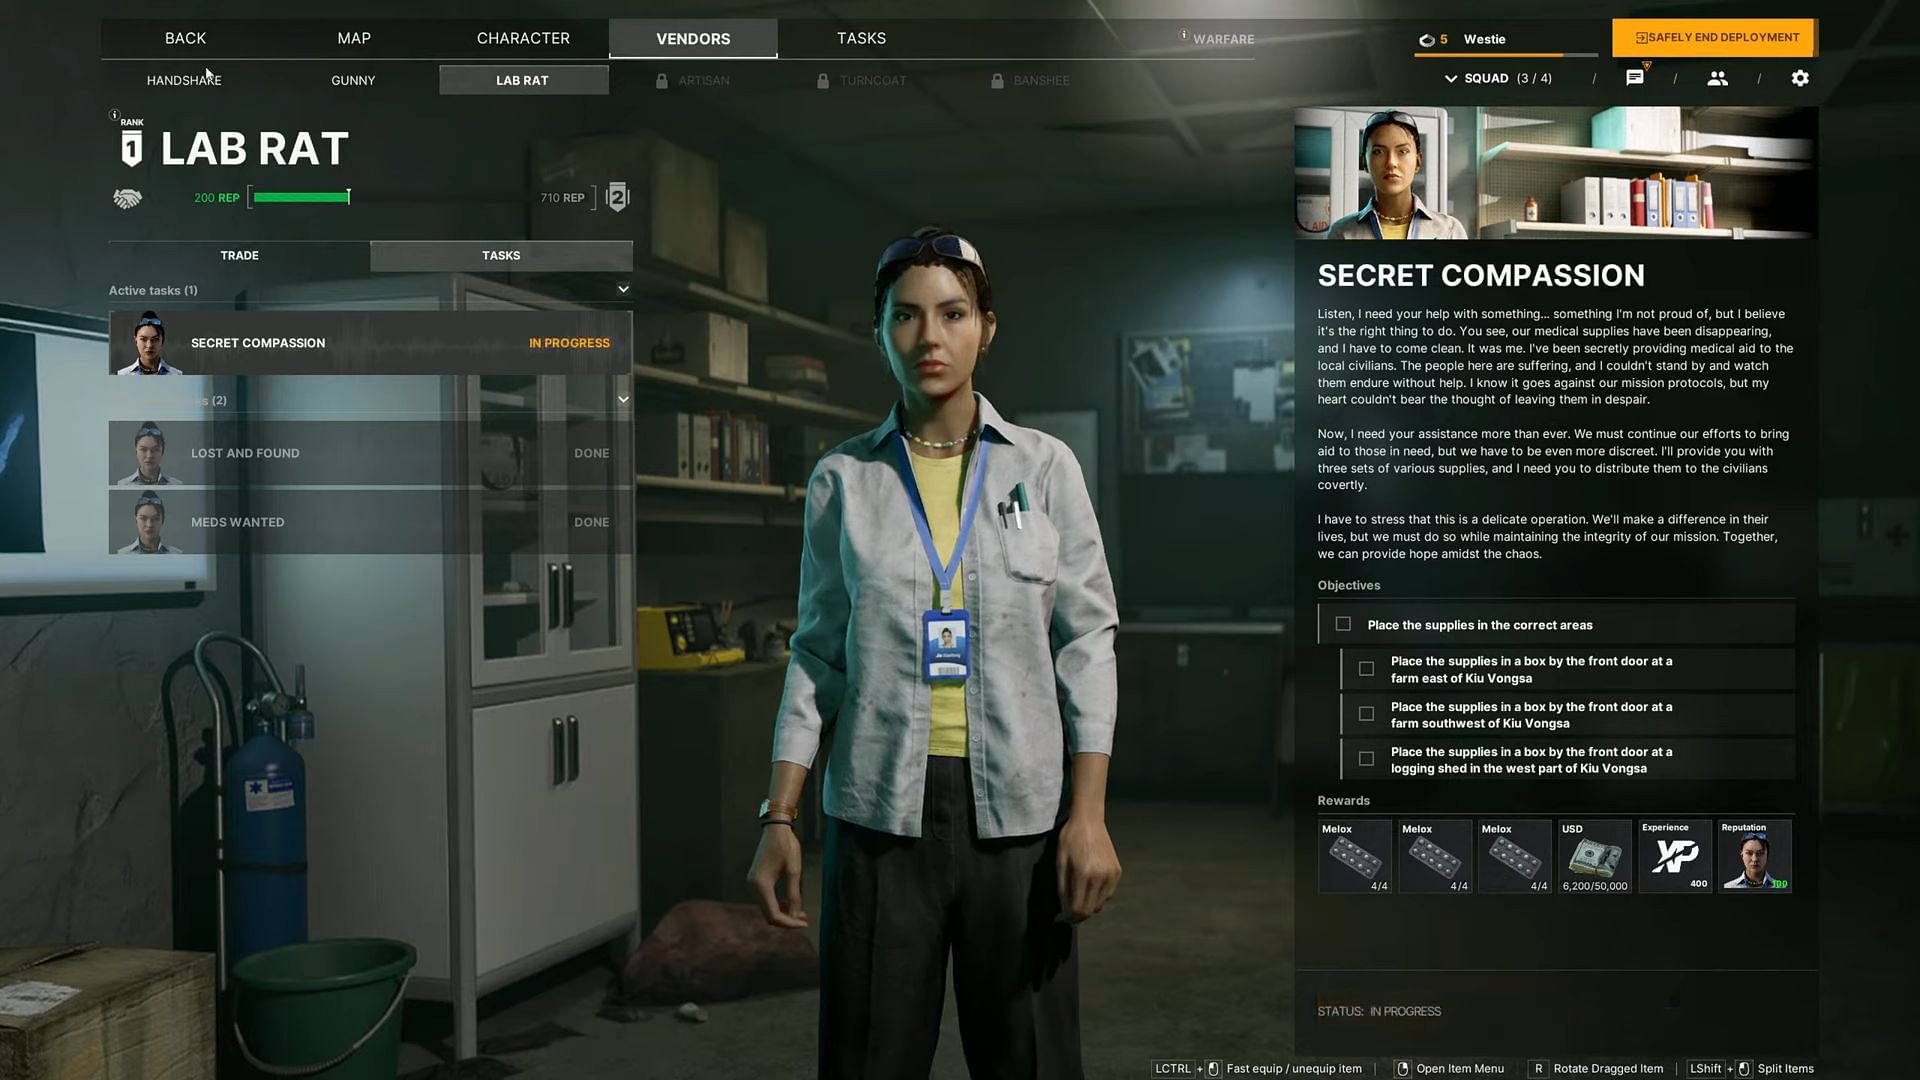 Secret Compassion mission in the game. (Image via Westie/YouTube || Madfinger Games)